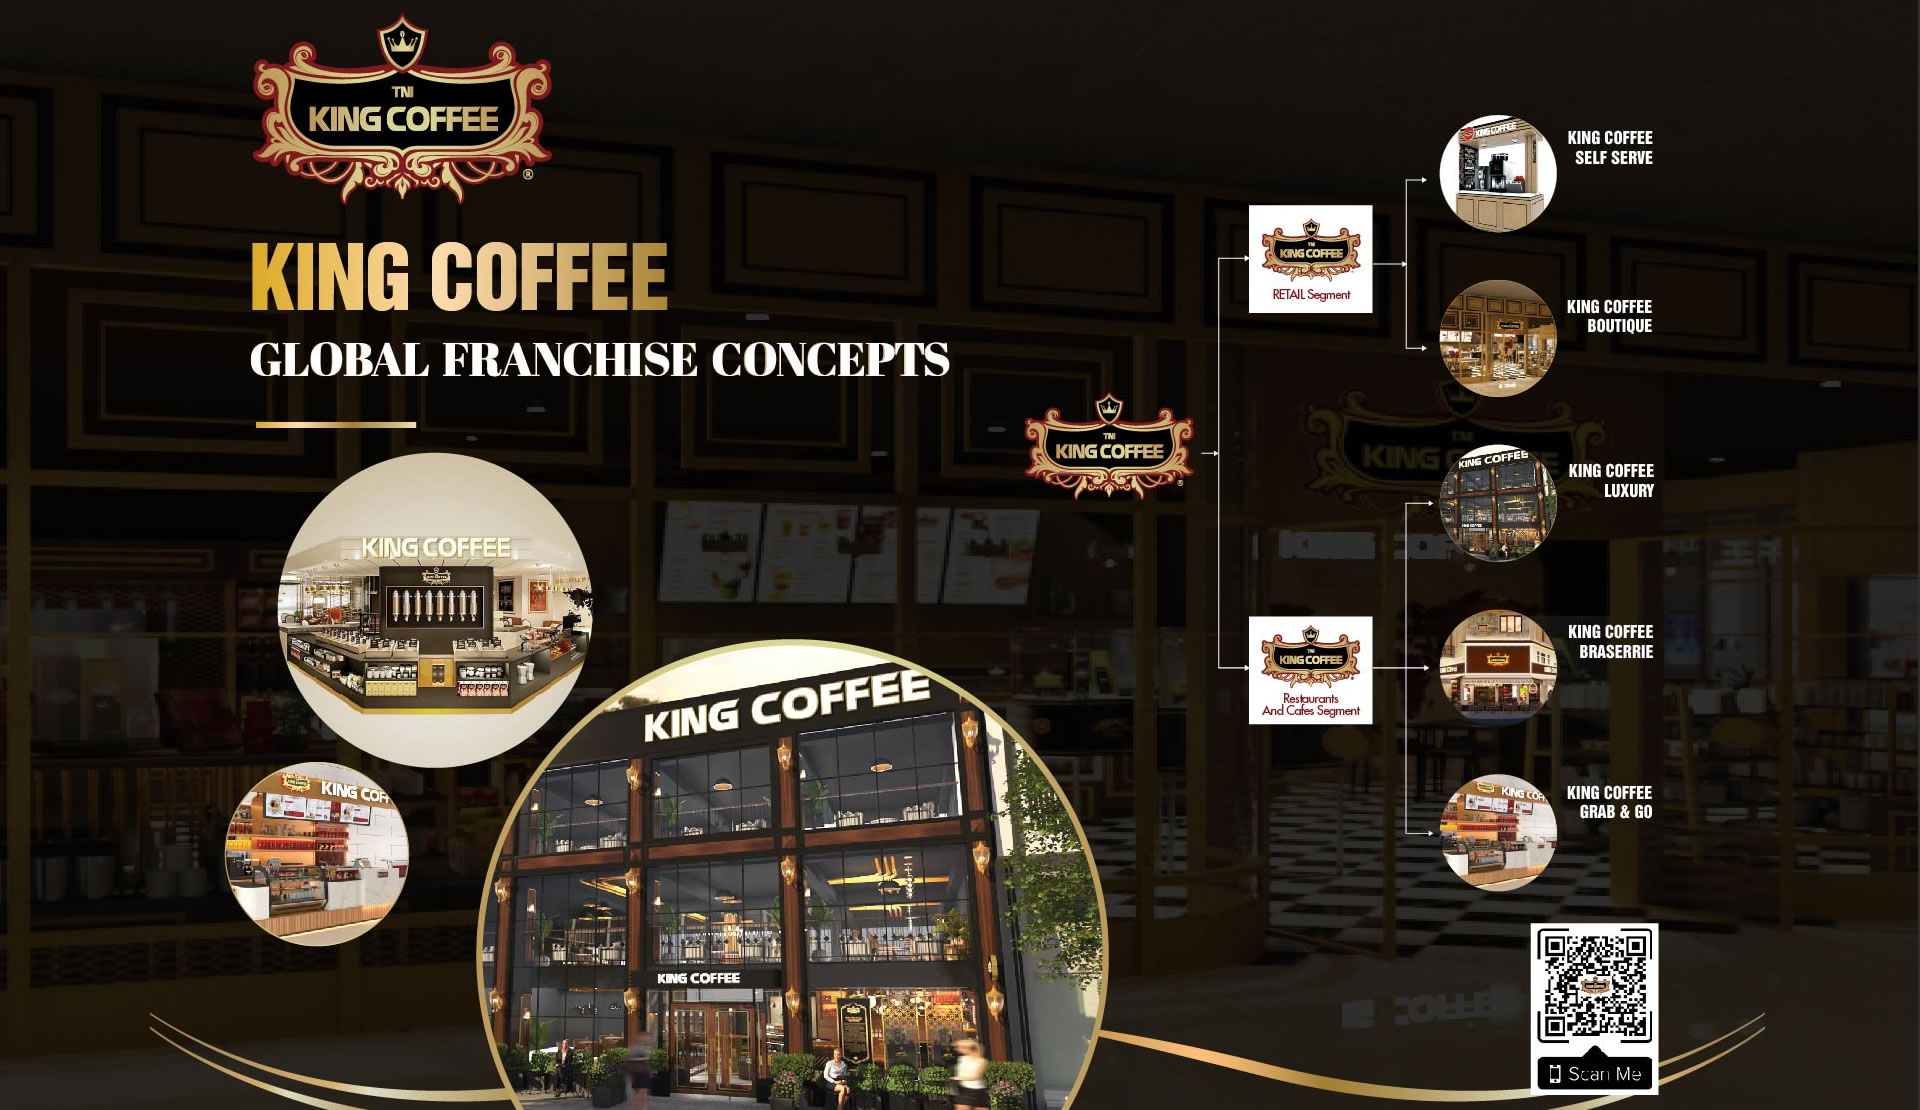 King-Cofee - Global Franchise Concepts